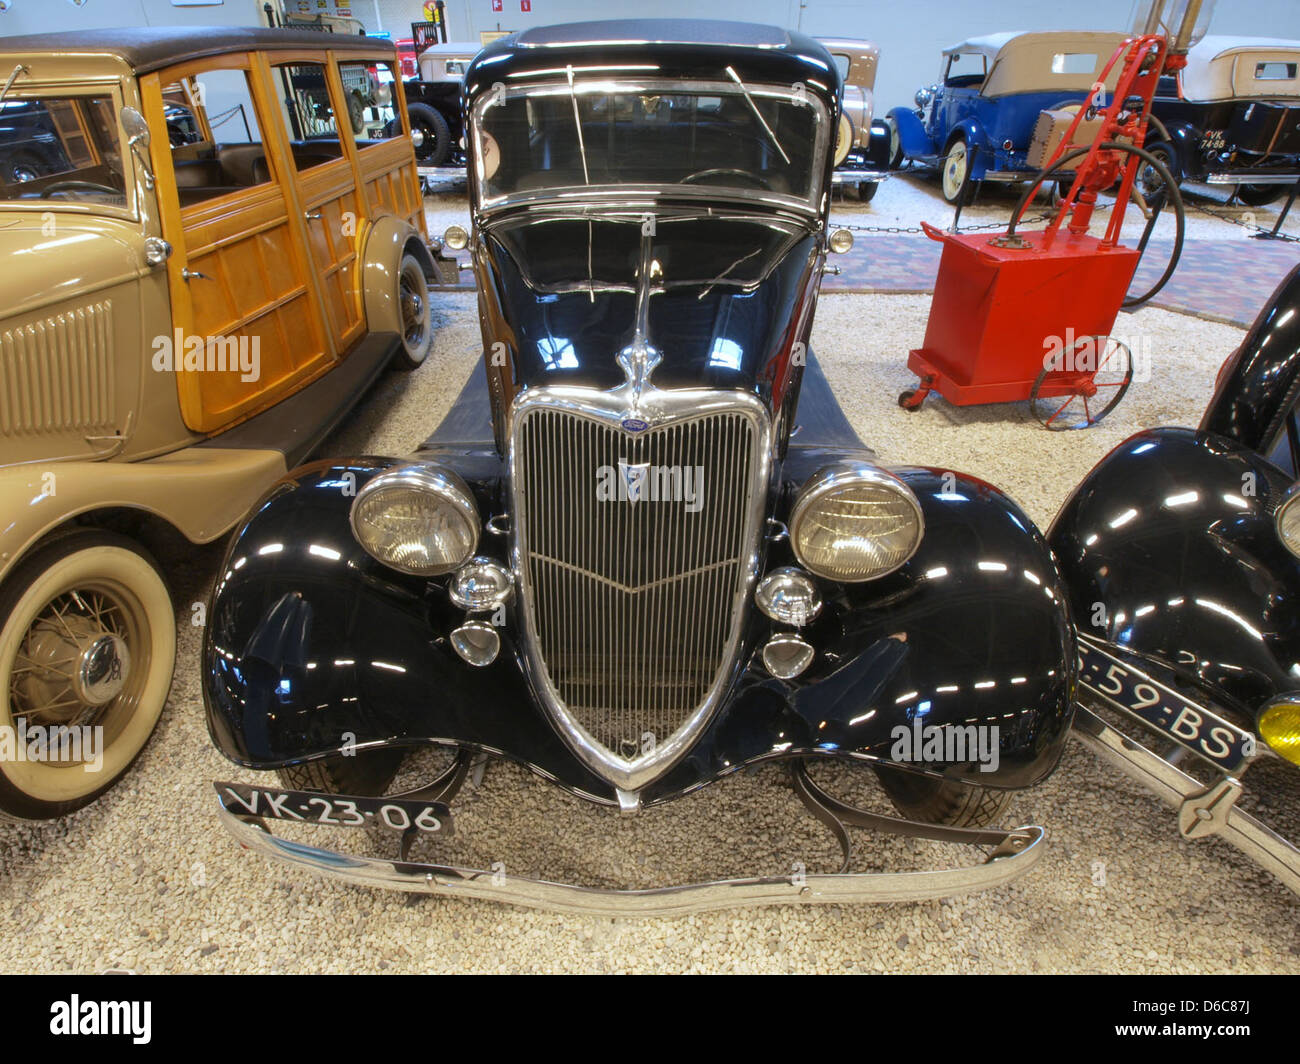 1934 Ford 730 con extended carrosserie pic1. Foto Stock